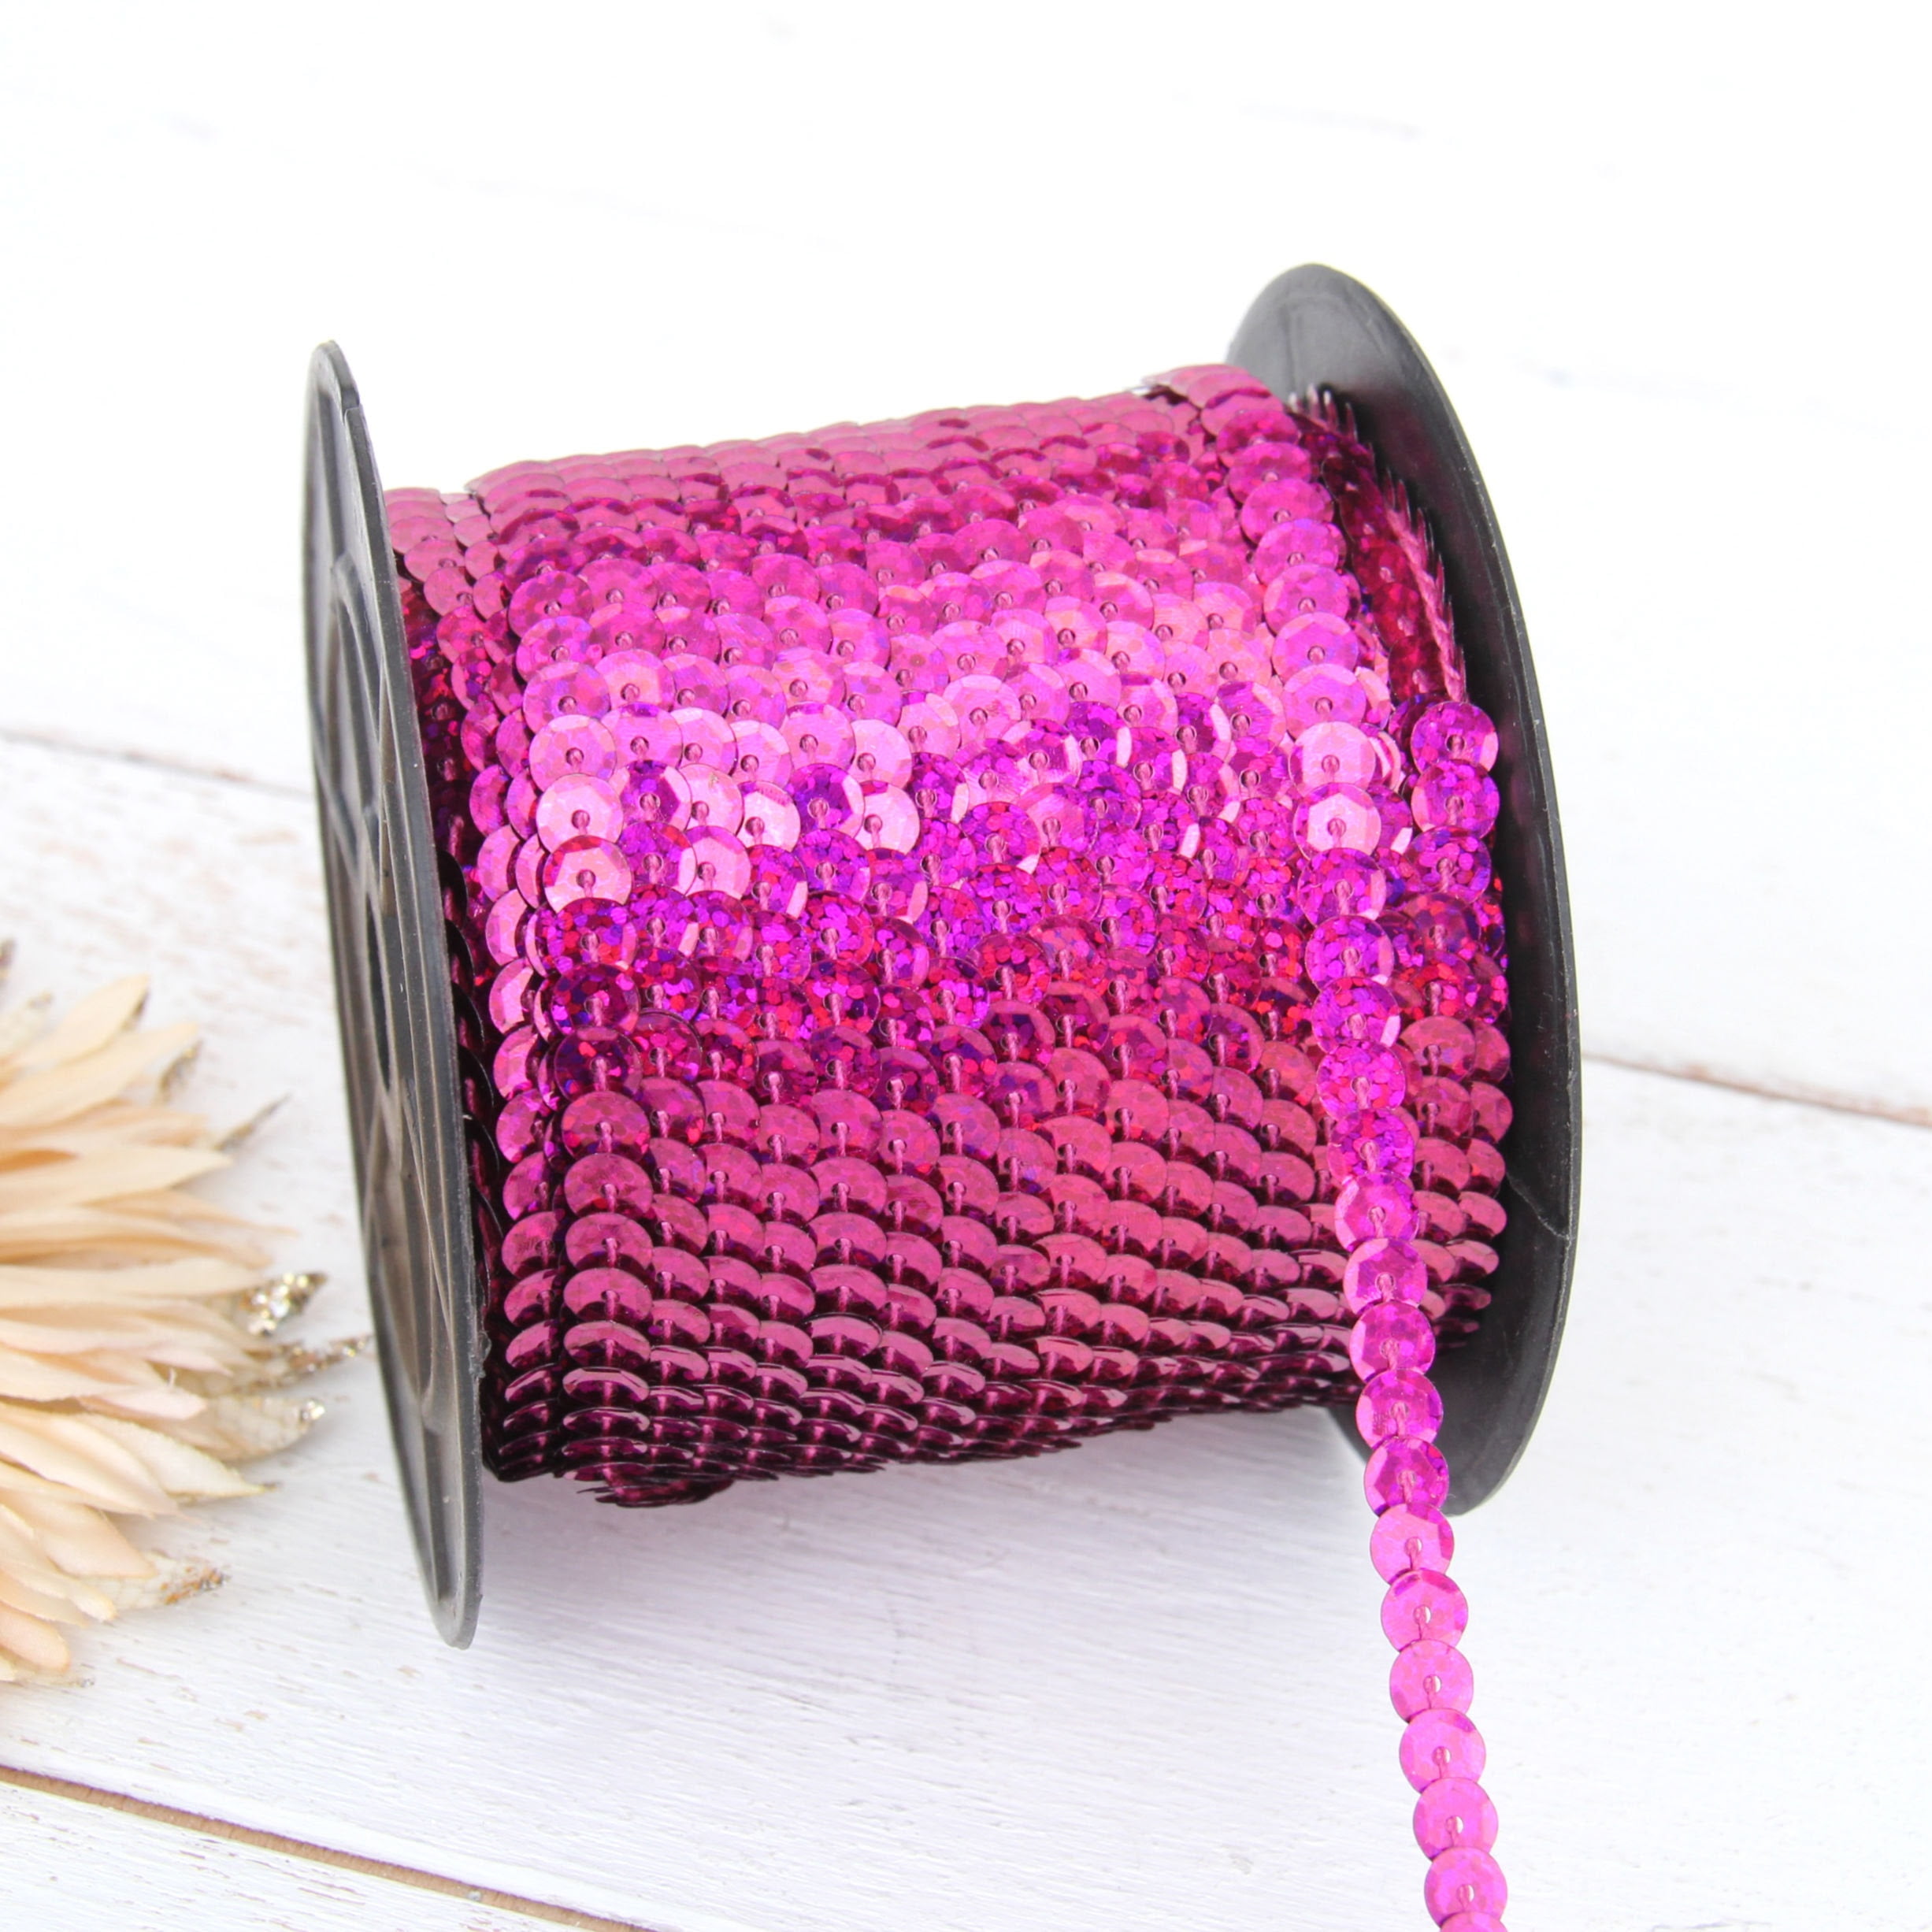 More For Crafting Threadart 6MM Sequin String Costumes Decorating Chocolate 80 Yard Roll 